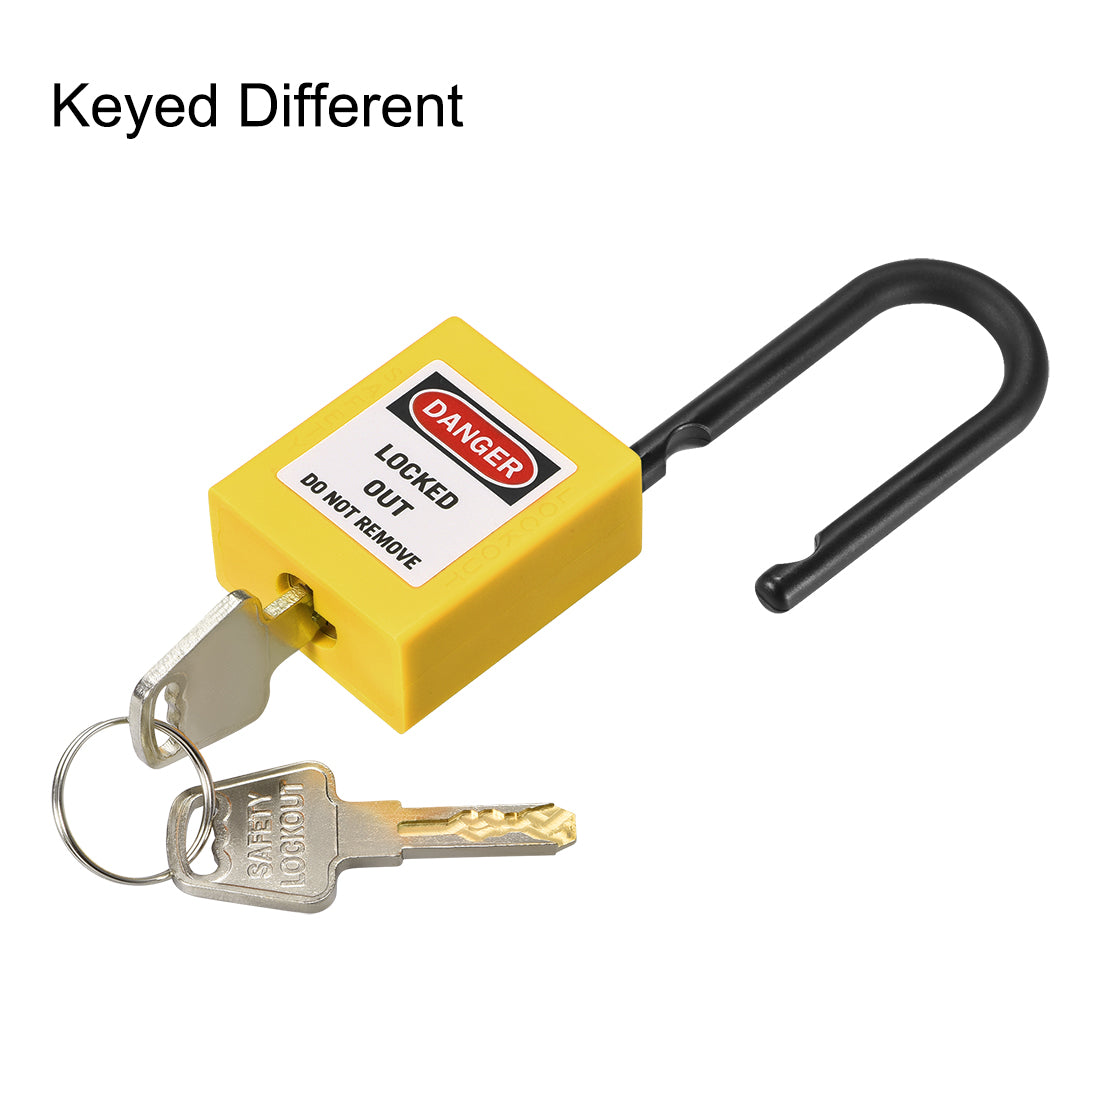 uxcell Uxcell Lockout Tagout Safety Padlock 38mm Nylon Shackle Keyed Different Yellow